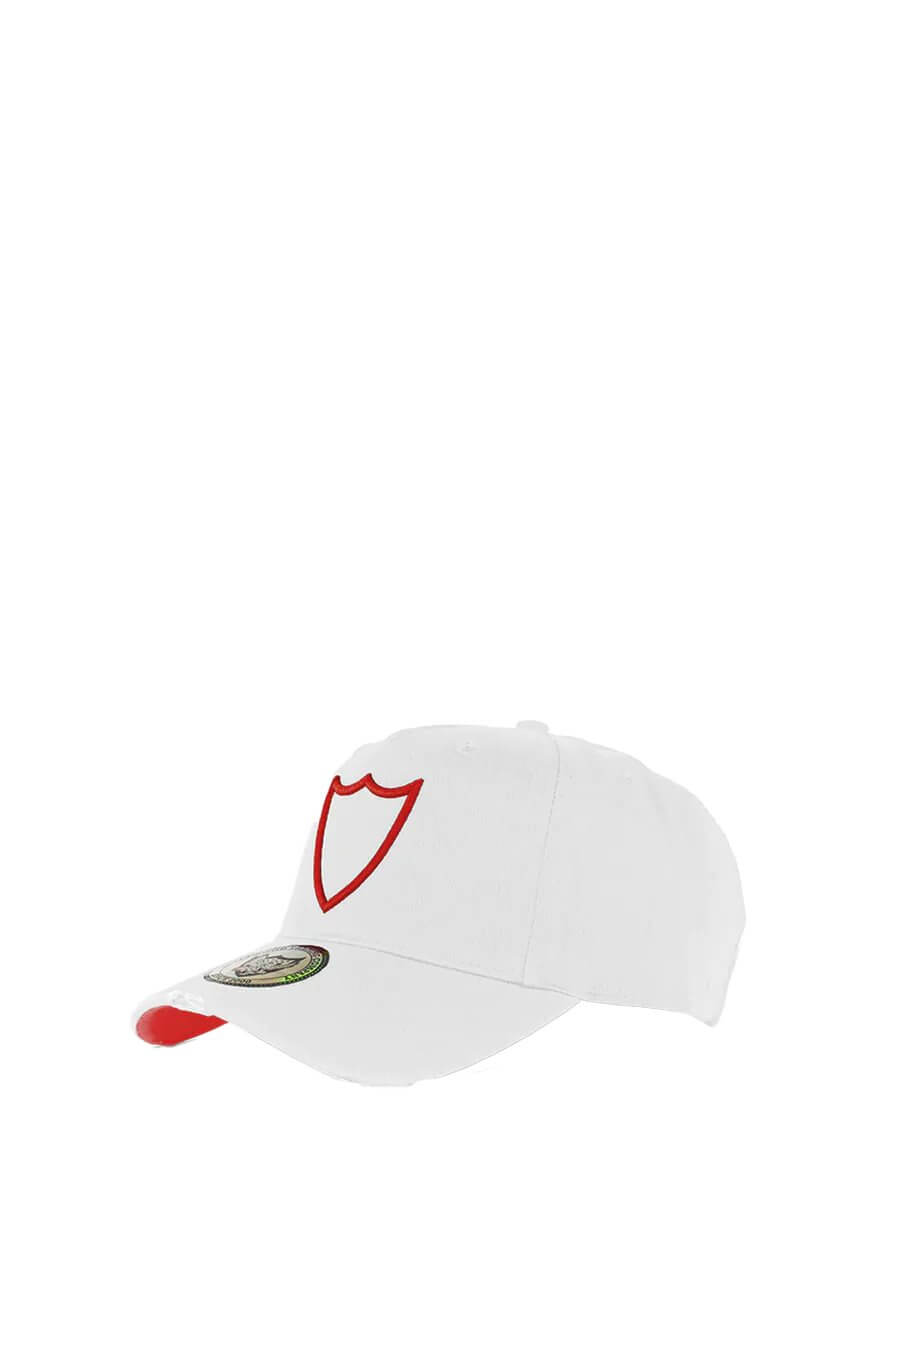 HTC LOGO BASEBALL CAP Baseball cap with preformed peak, round crown with eyelets, HTC Los Angeles shield logo embroidered on the front, adjustable strap on the back. One size fits all. 100% cotton. HTC LOS ANGELES